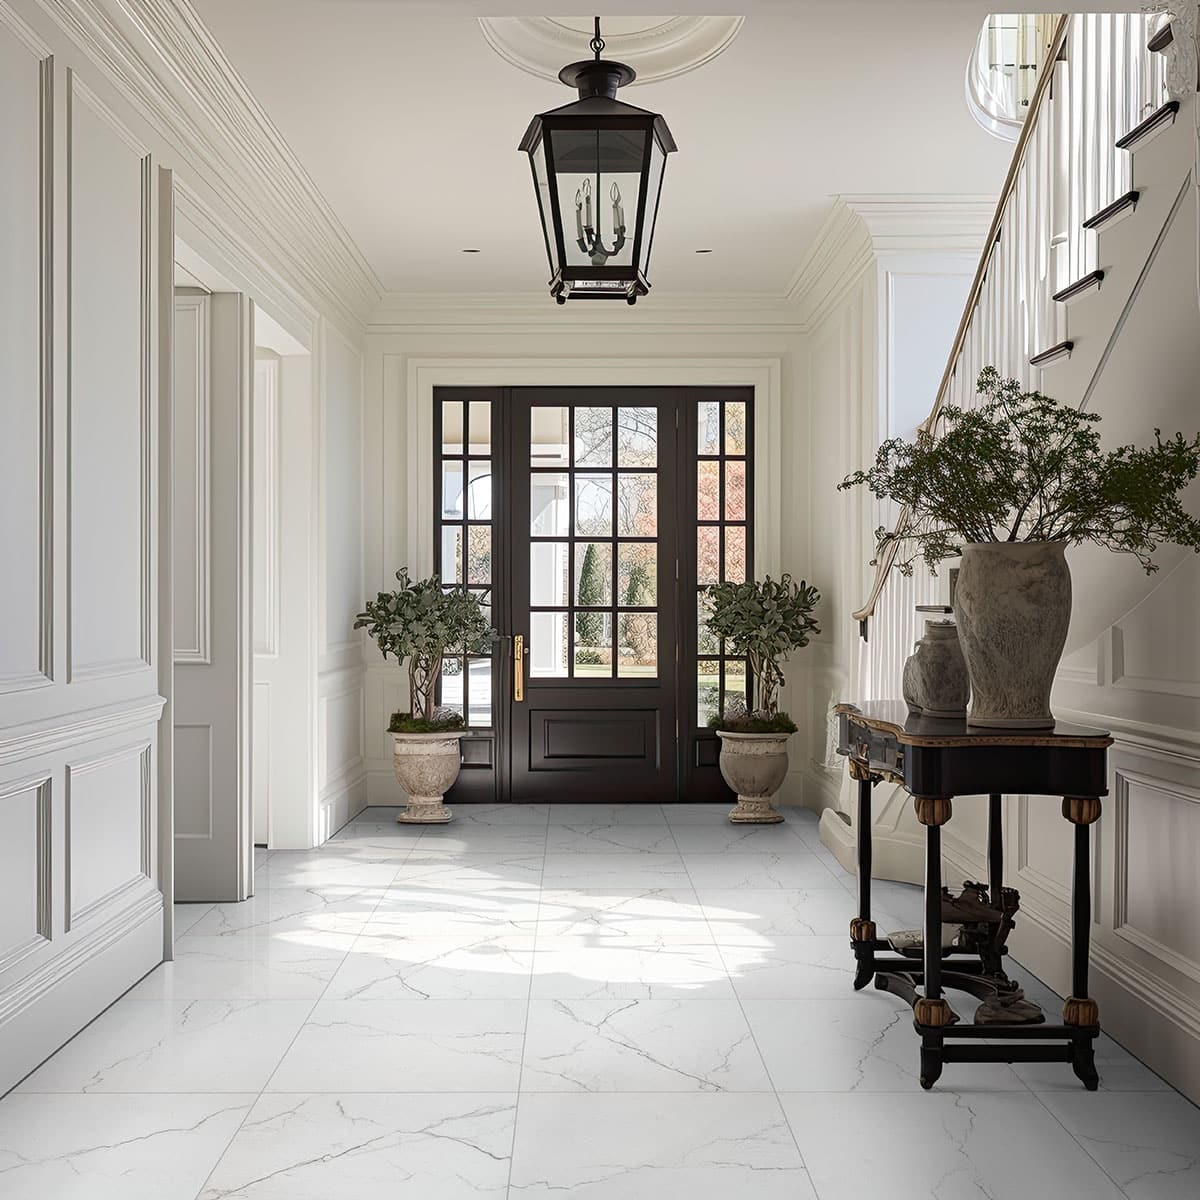 Marble-Look Tile Flooring At A Las Vegas Home Entrance, Highlighting Elegant Design Features